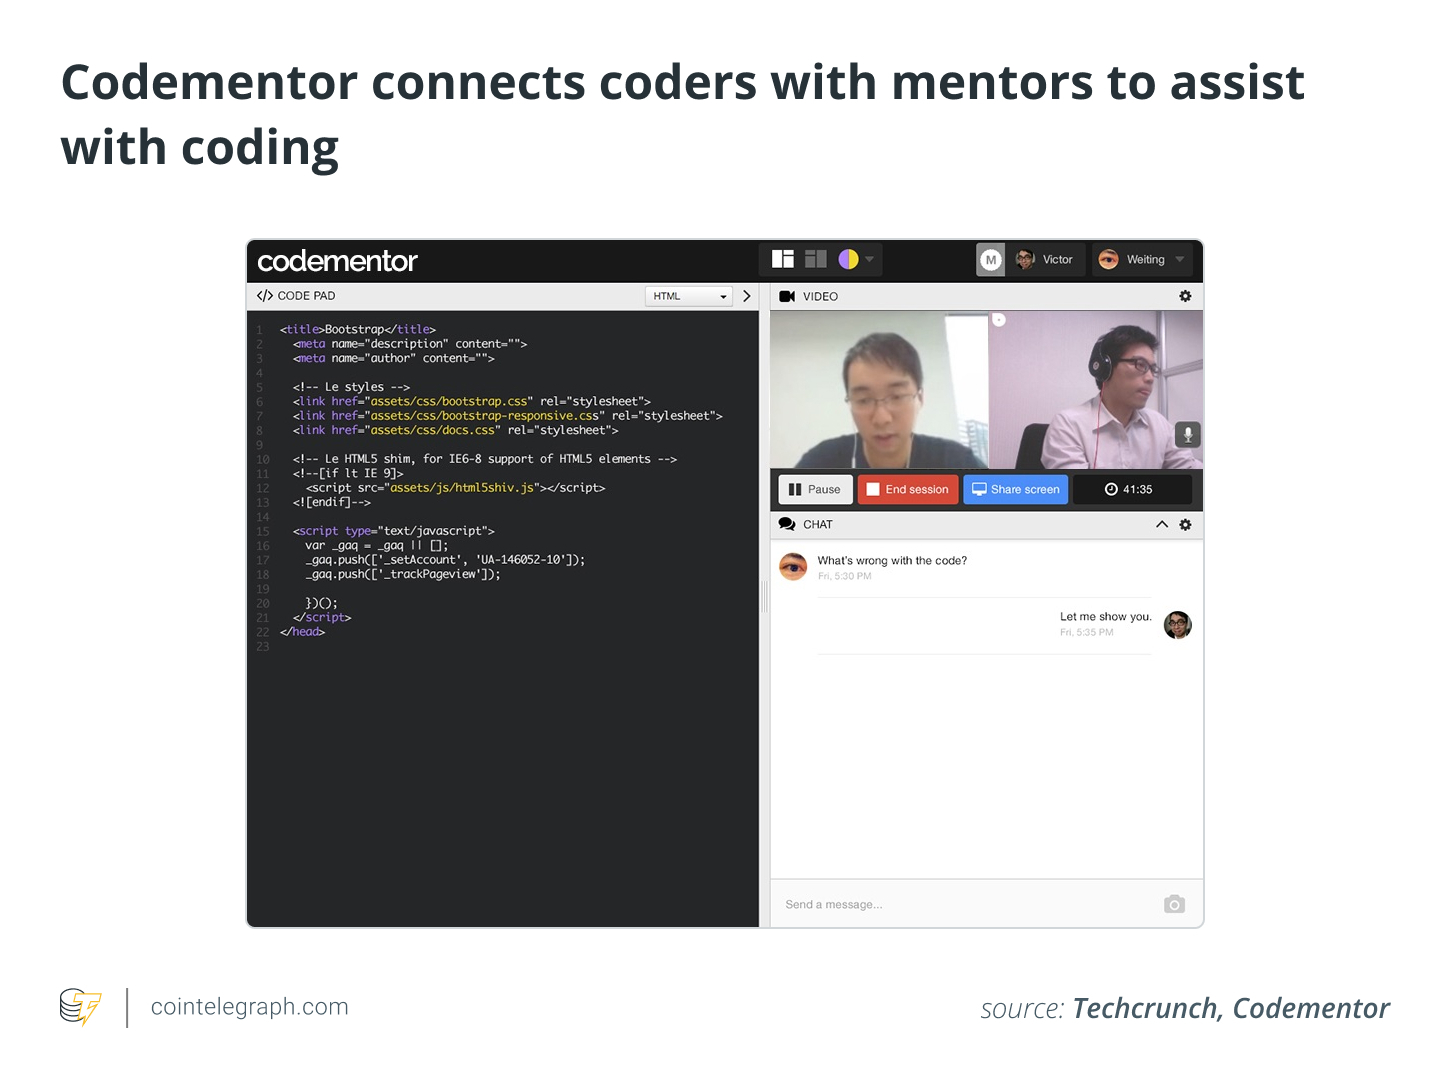 Codementor connects coders with mentors to assist with coding